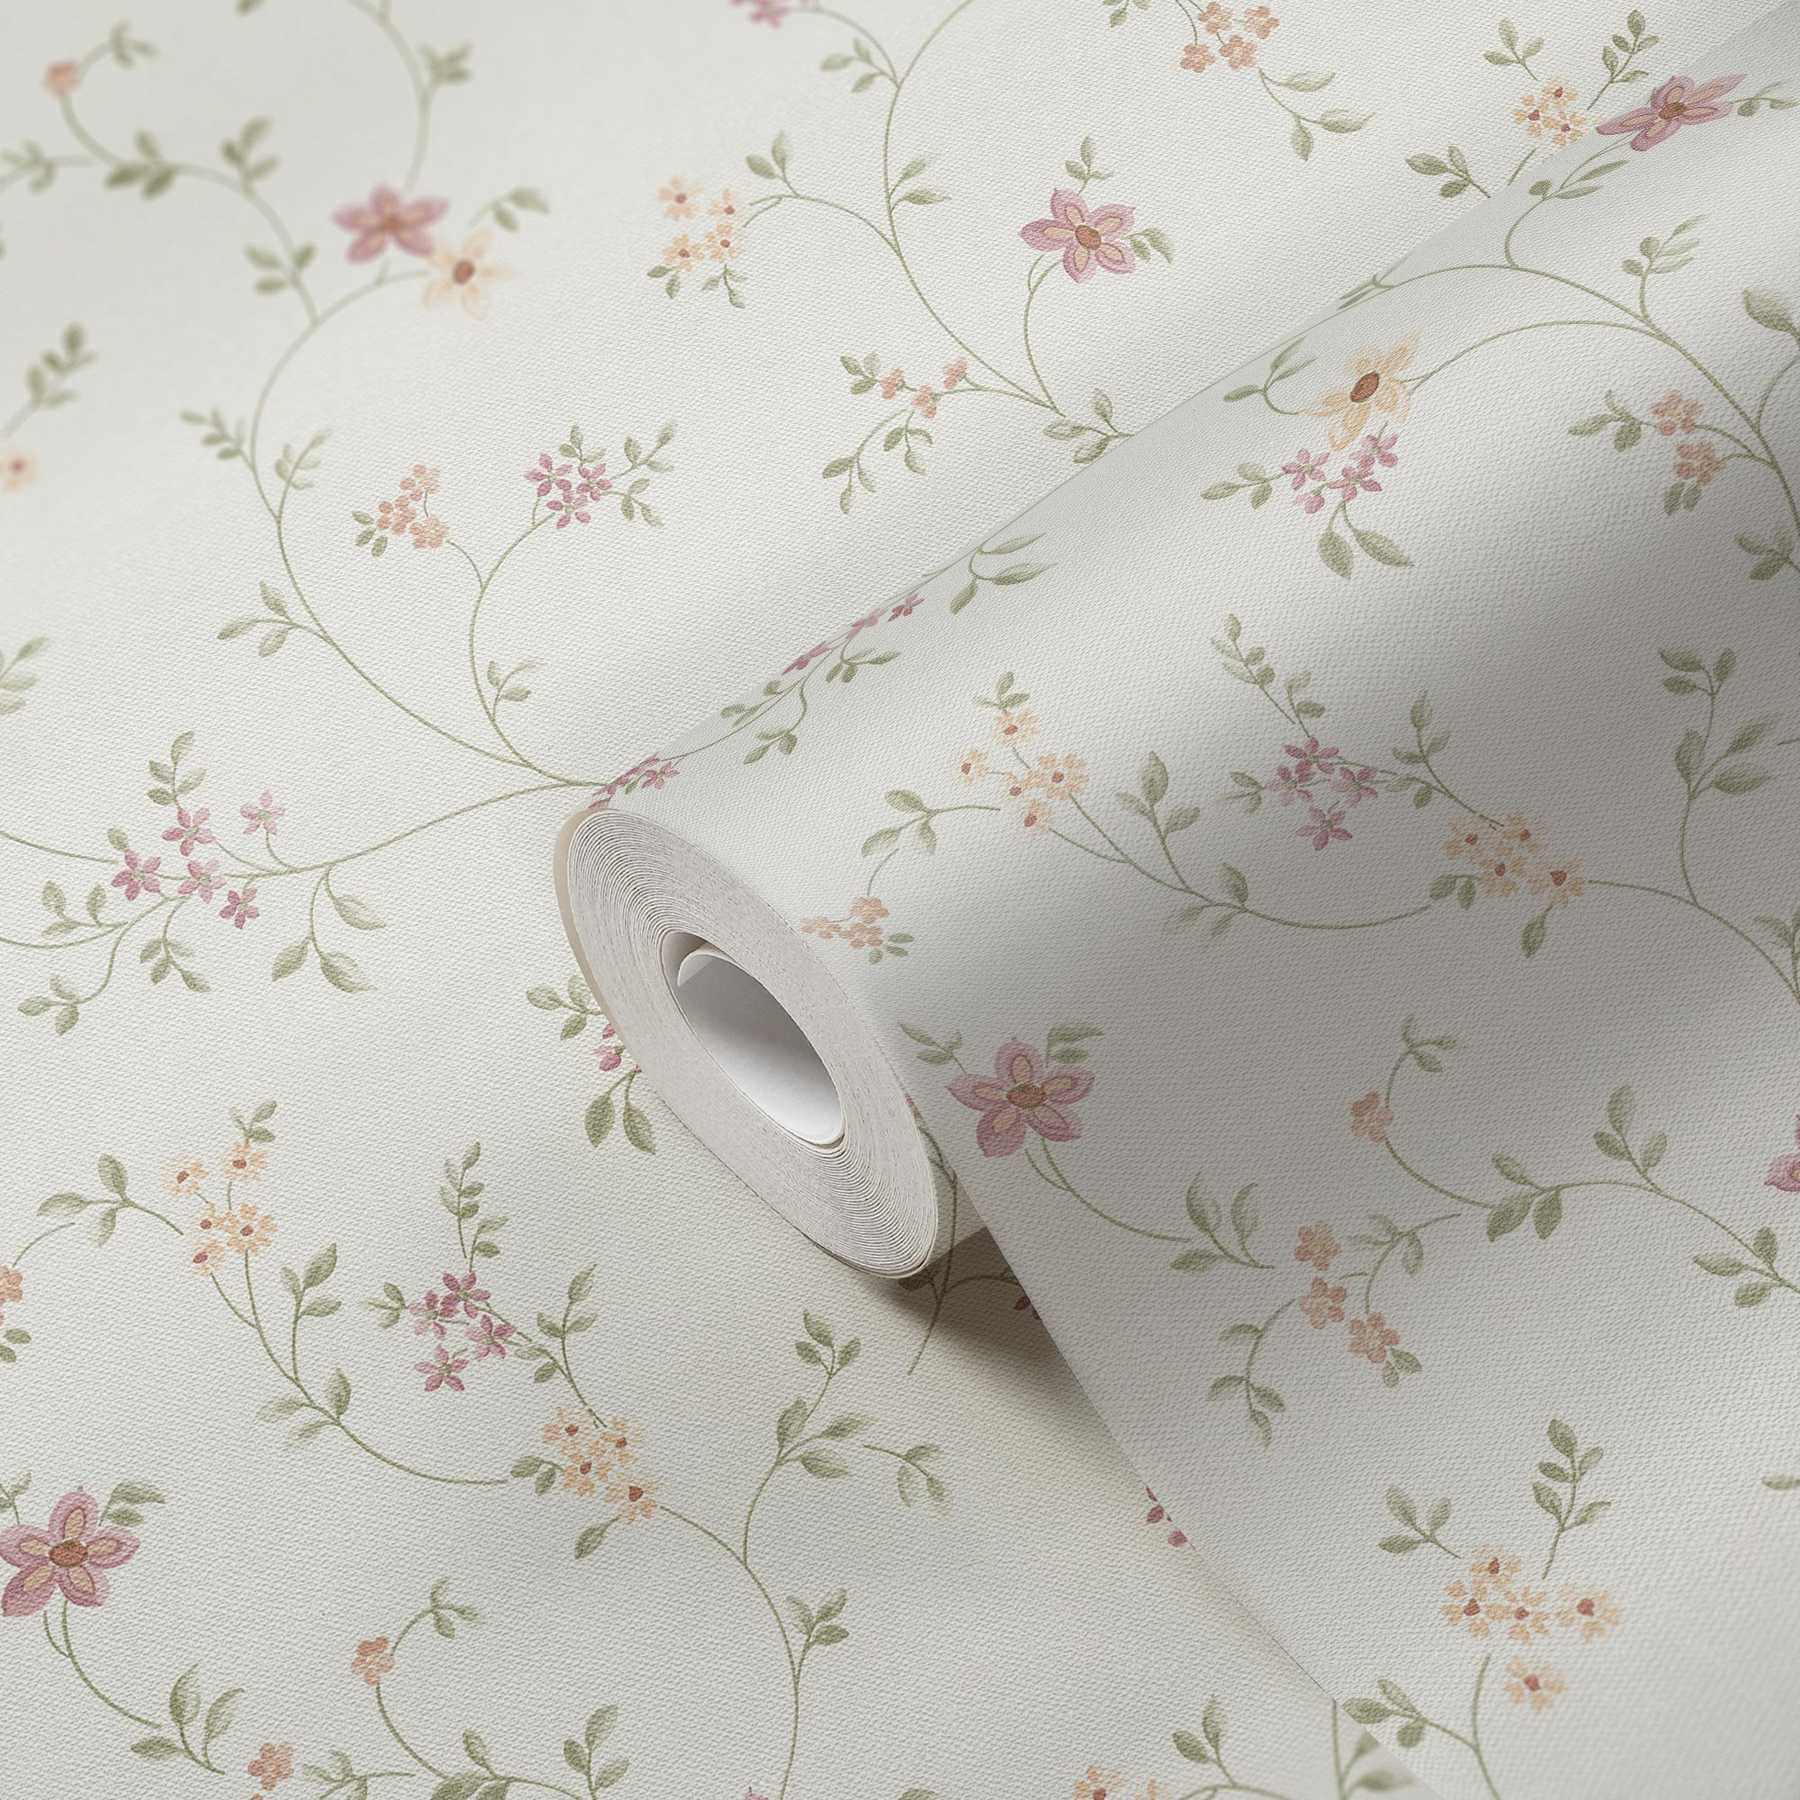             Wallpaper with flowers pattern in country style - colourful, green, white
        